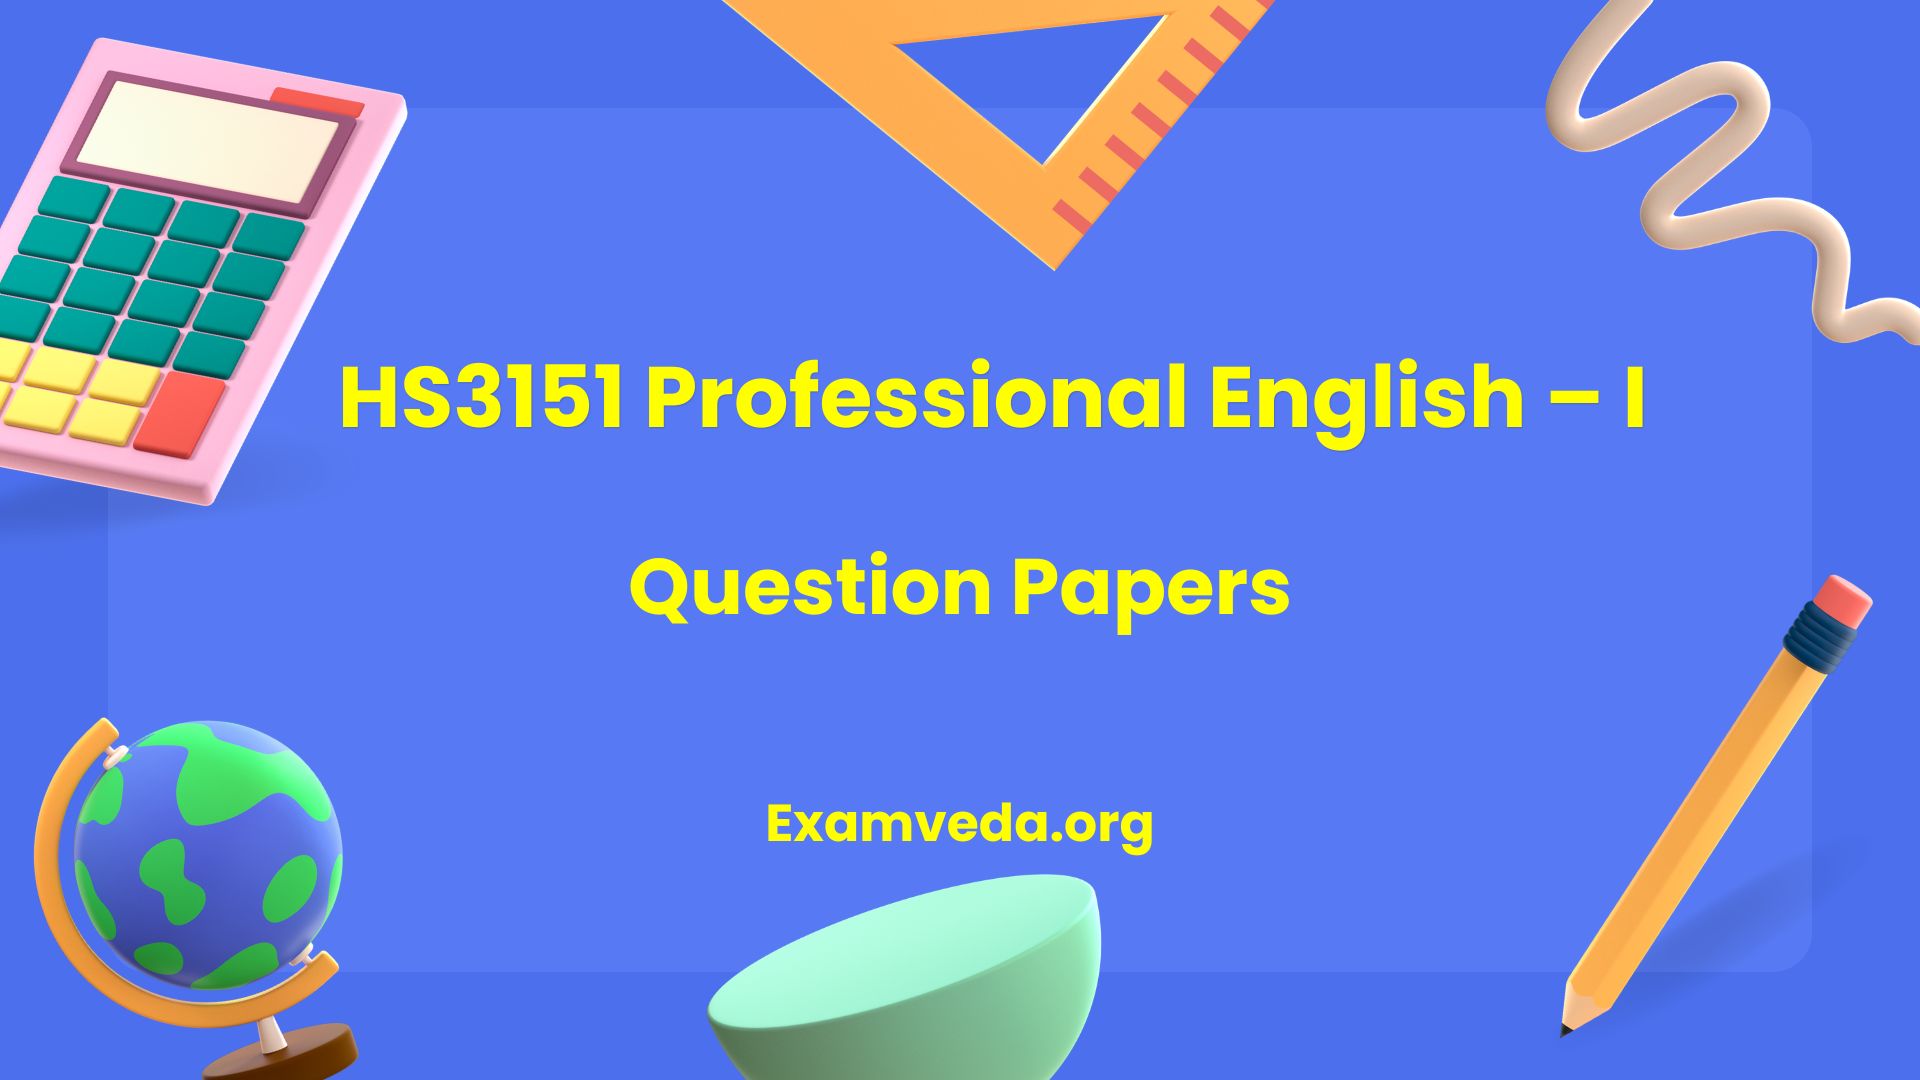 HS3151 Professional English – I Question Papers